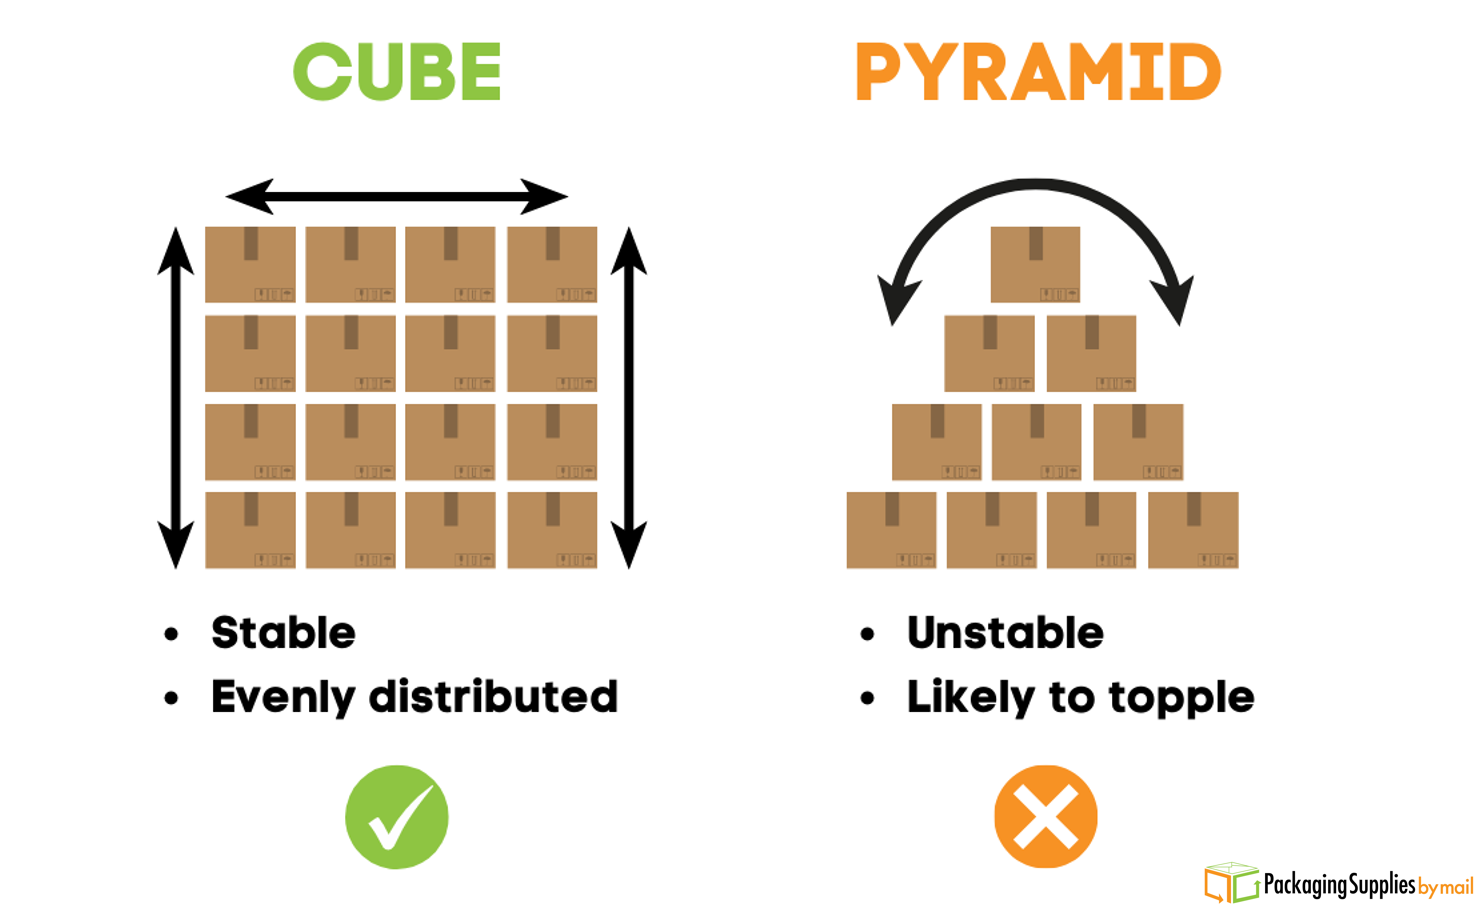 A comparison of the stability of a cube vs. a pyramid.